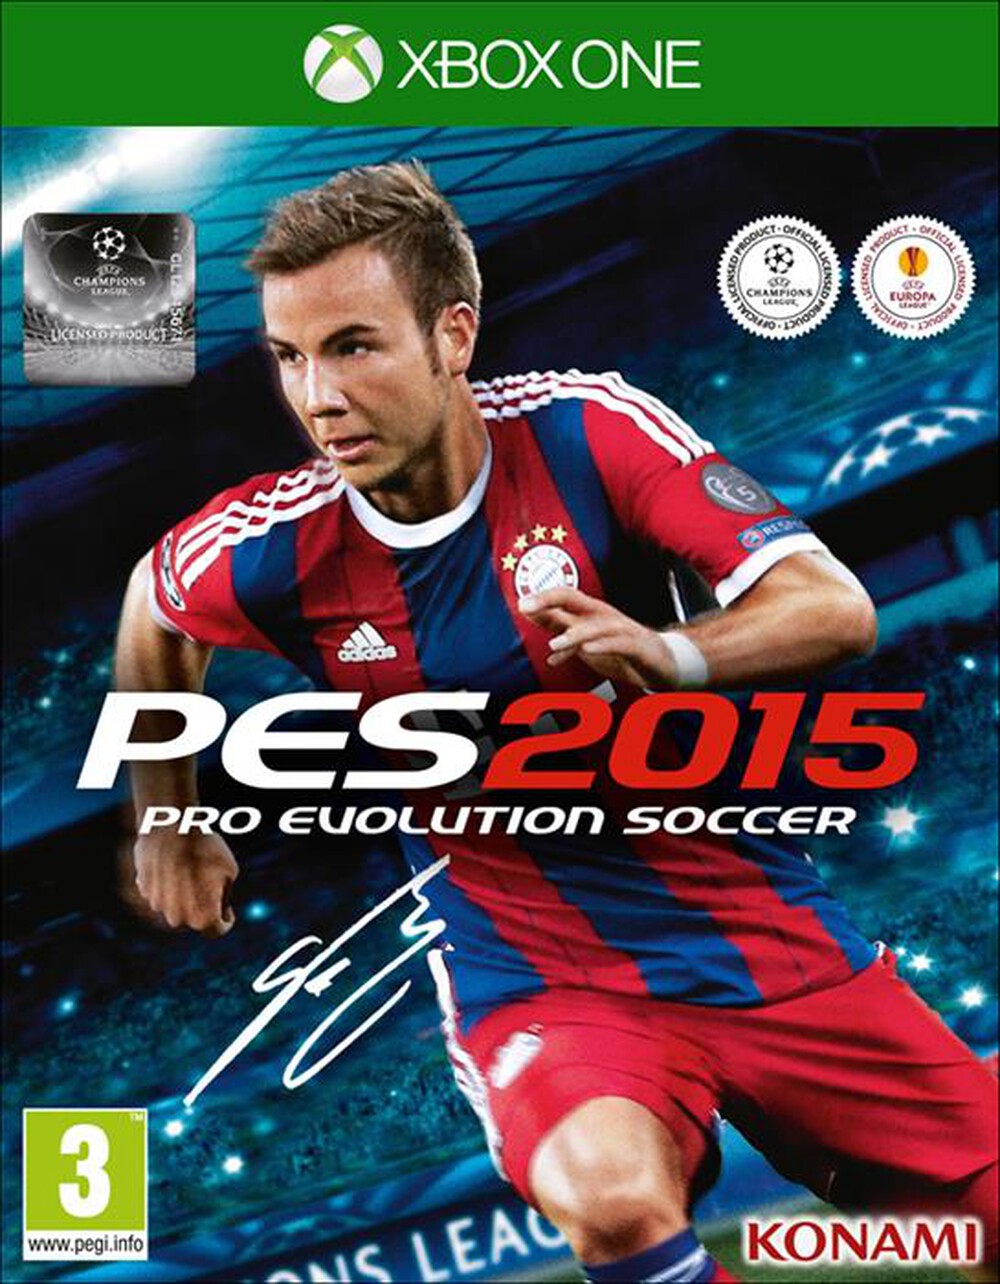 "HALIFAX - PES 2015 Day One Edition Xbox One - "